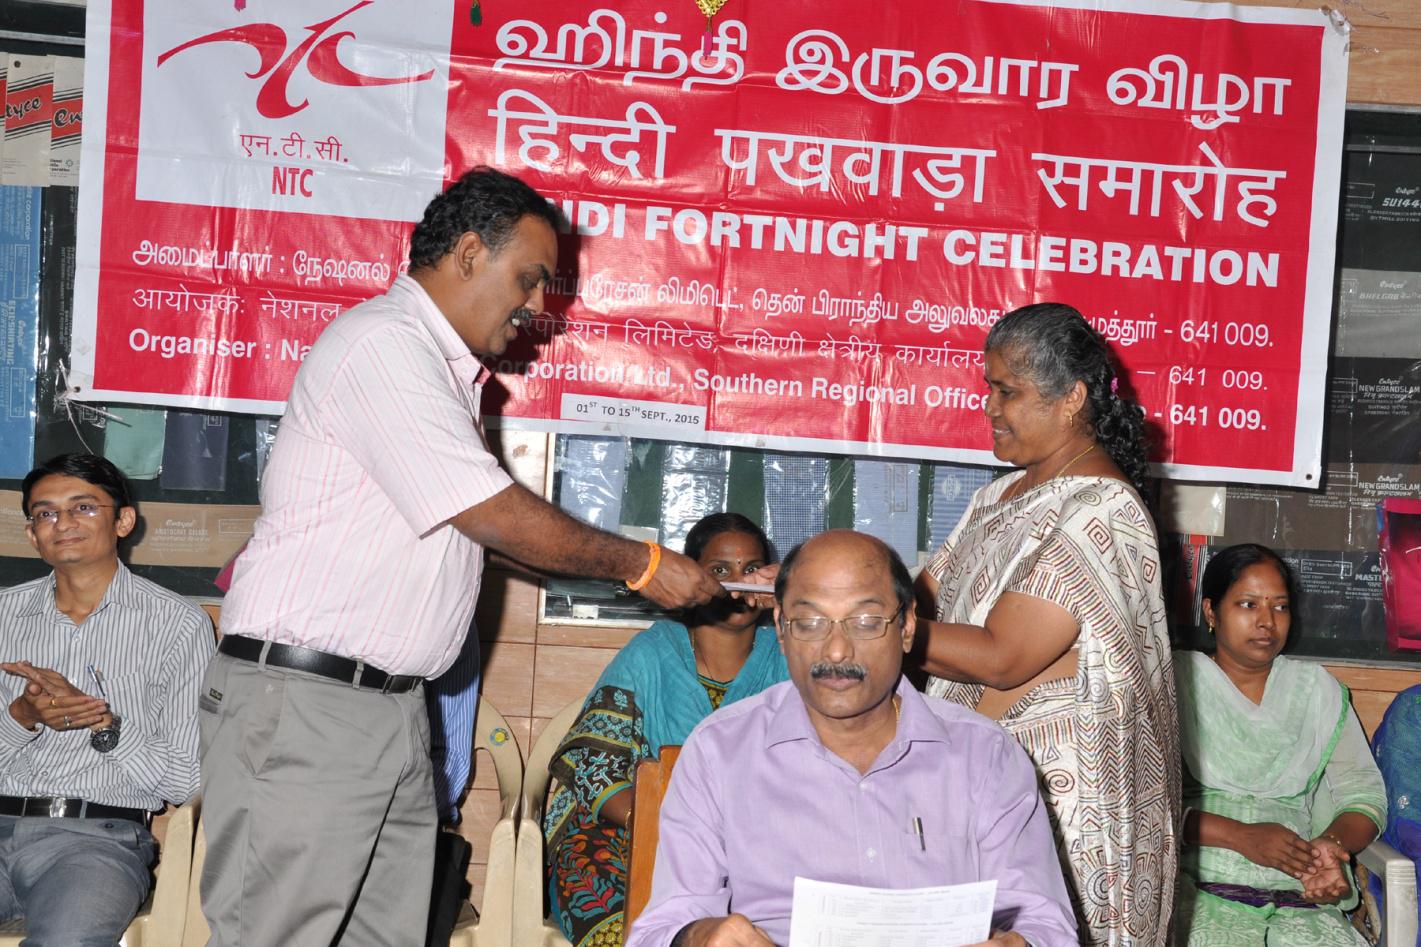 Shri R. Rajendrakumar, Dy. General Manager (HR), S R O distributing prize to Smt. C. Parimalam, S R O on the occasion of Hindi Fortnight Prize Distribution Function held on 26.09.2016 at NTC Ltd., Southern Regional Office, Coimbatore 